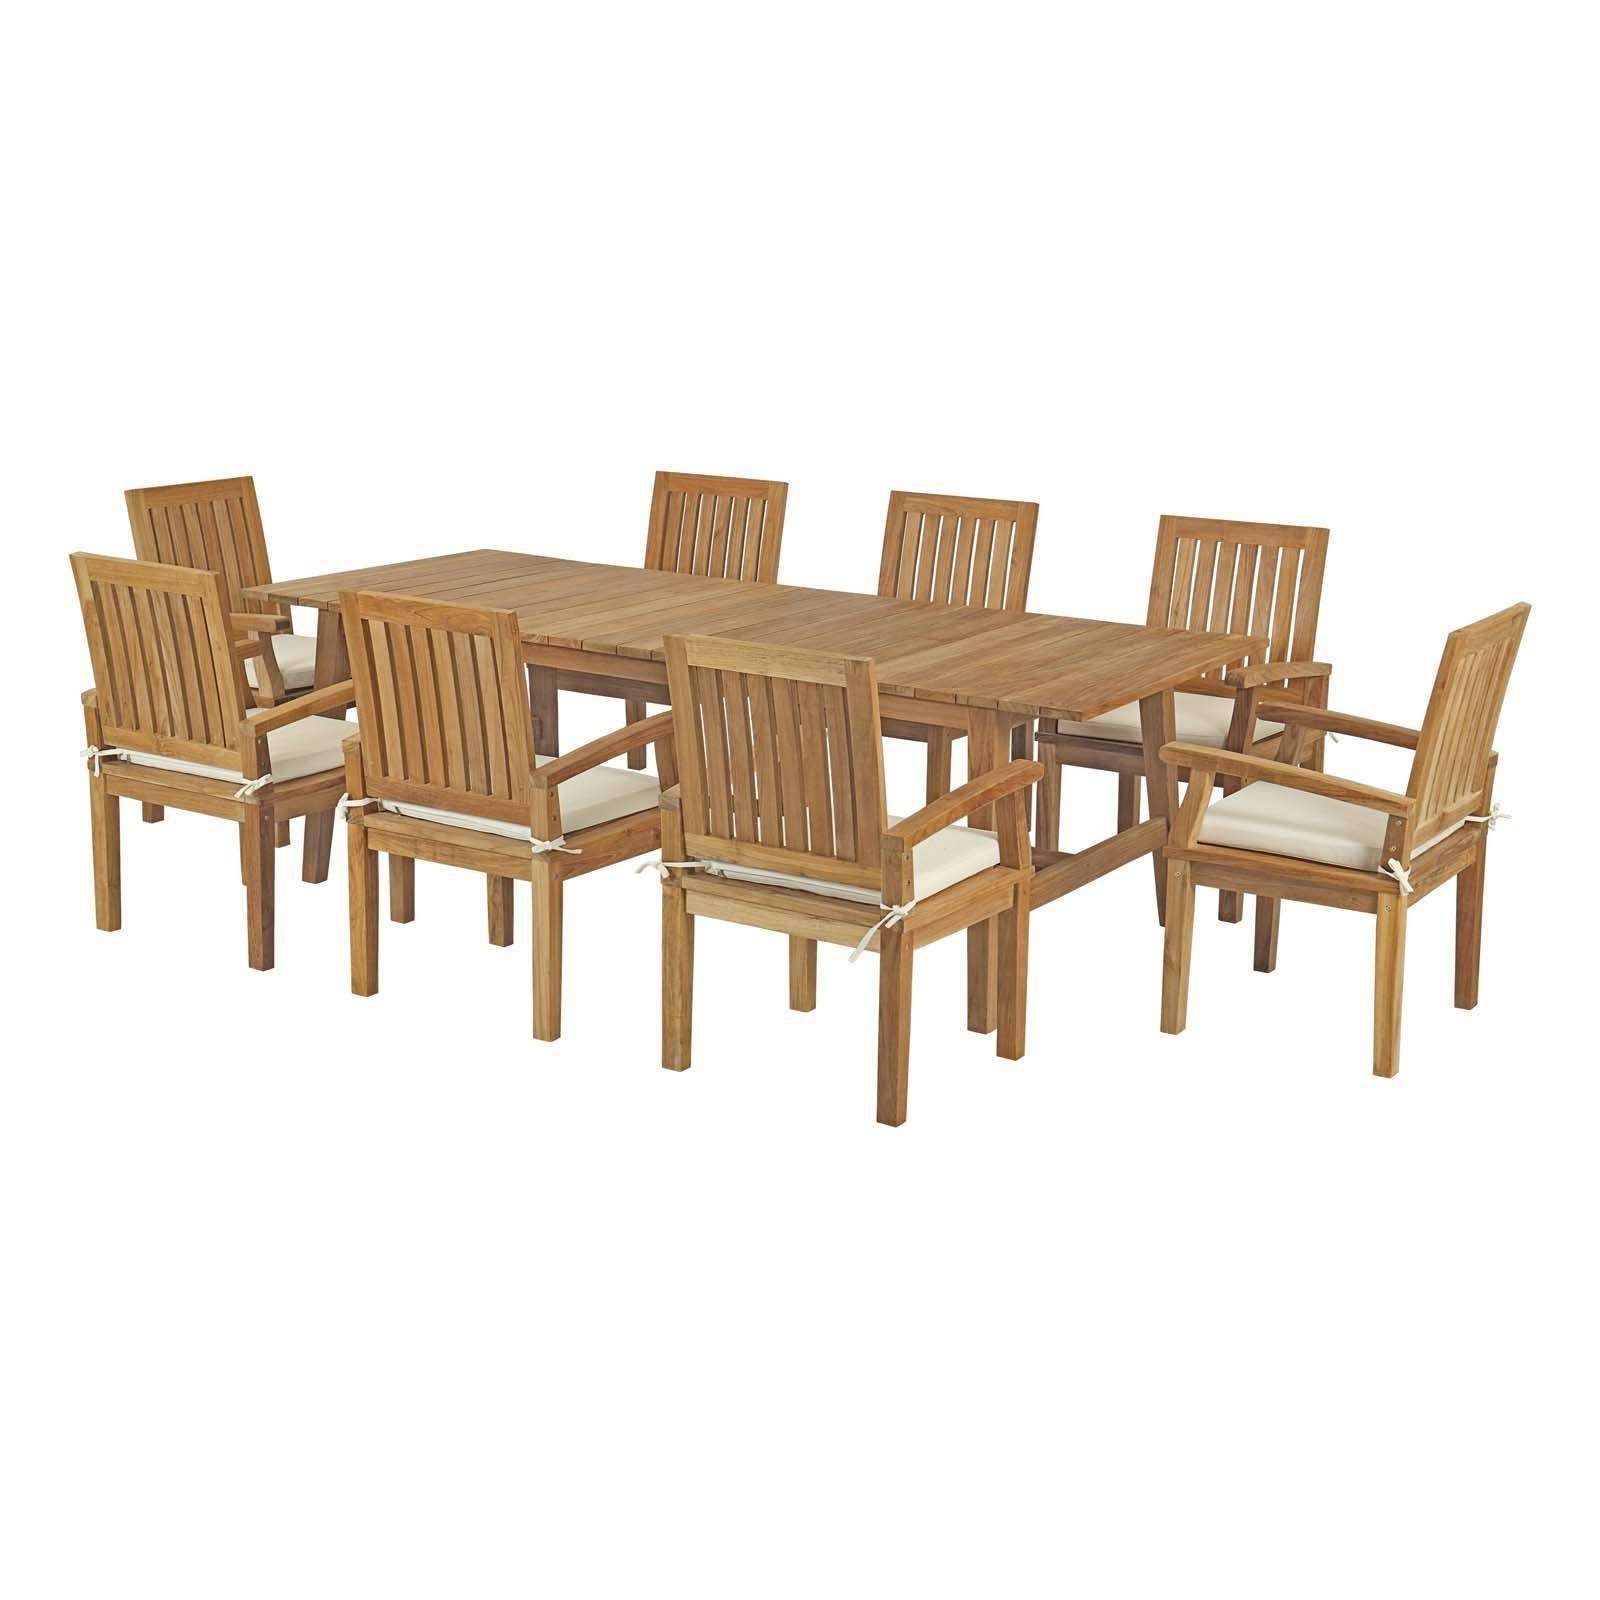 Newest 9 Piece Teak Wood Outdoor Dining Sets Intended For Modterior :: Outdoor :: Outdoor Sets :: Marina 9 Piece Outdoor Patio (View 15 of 15)